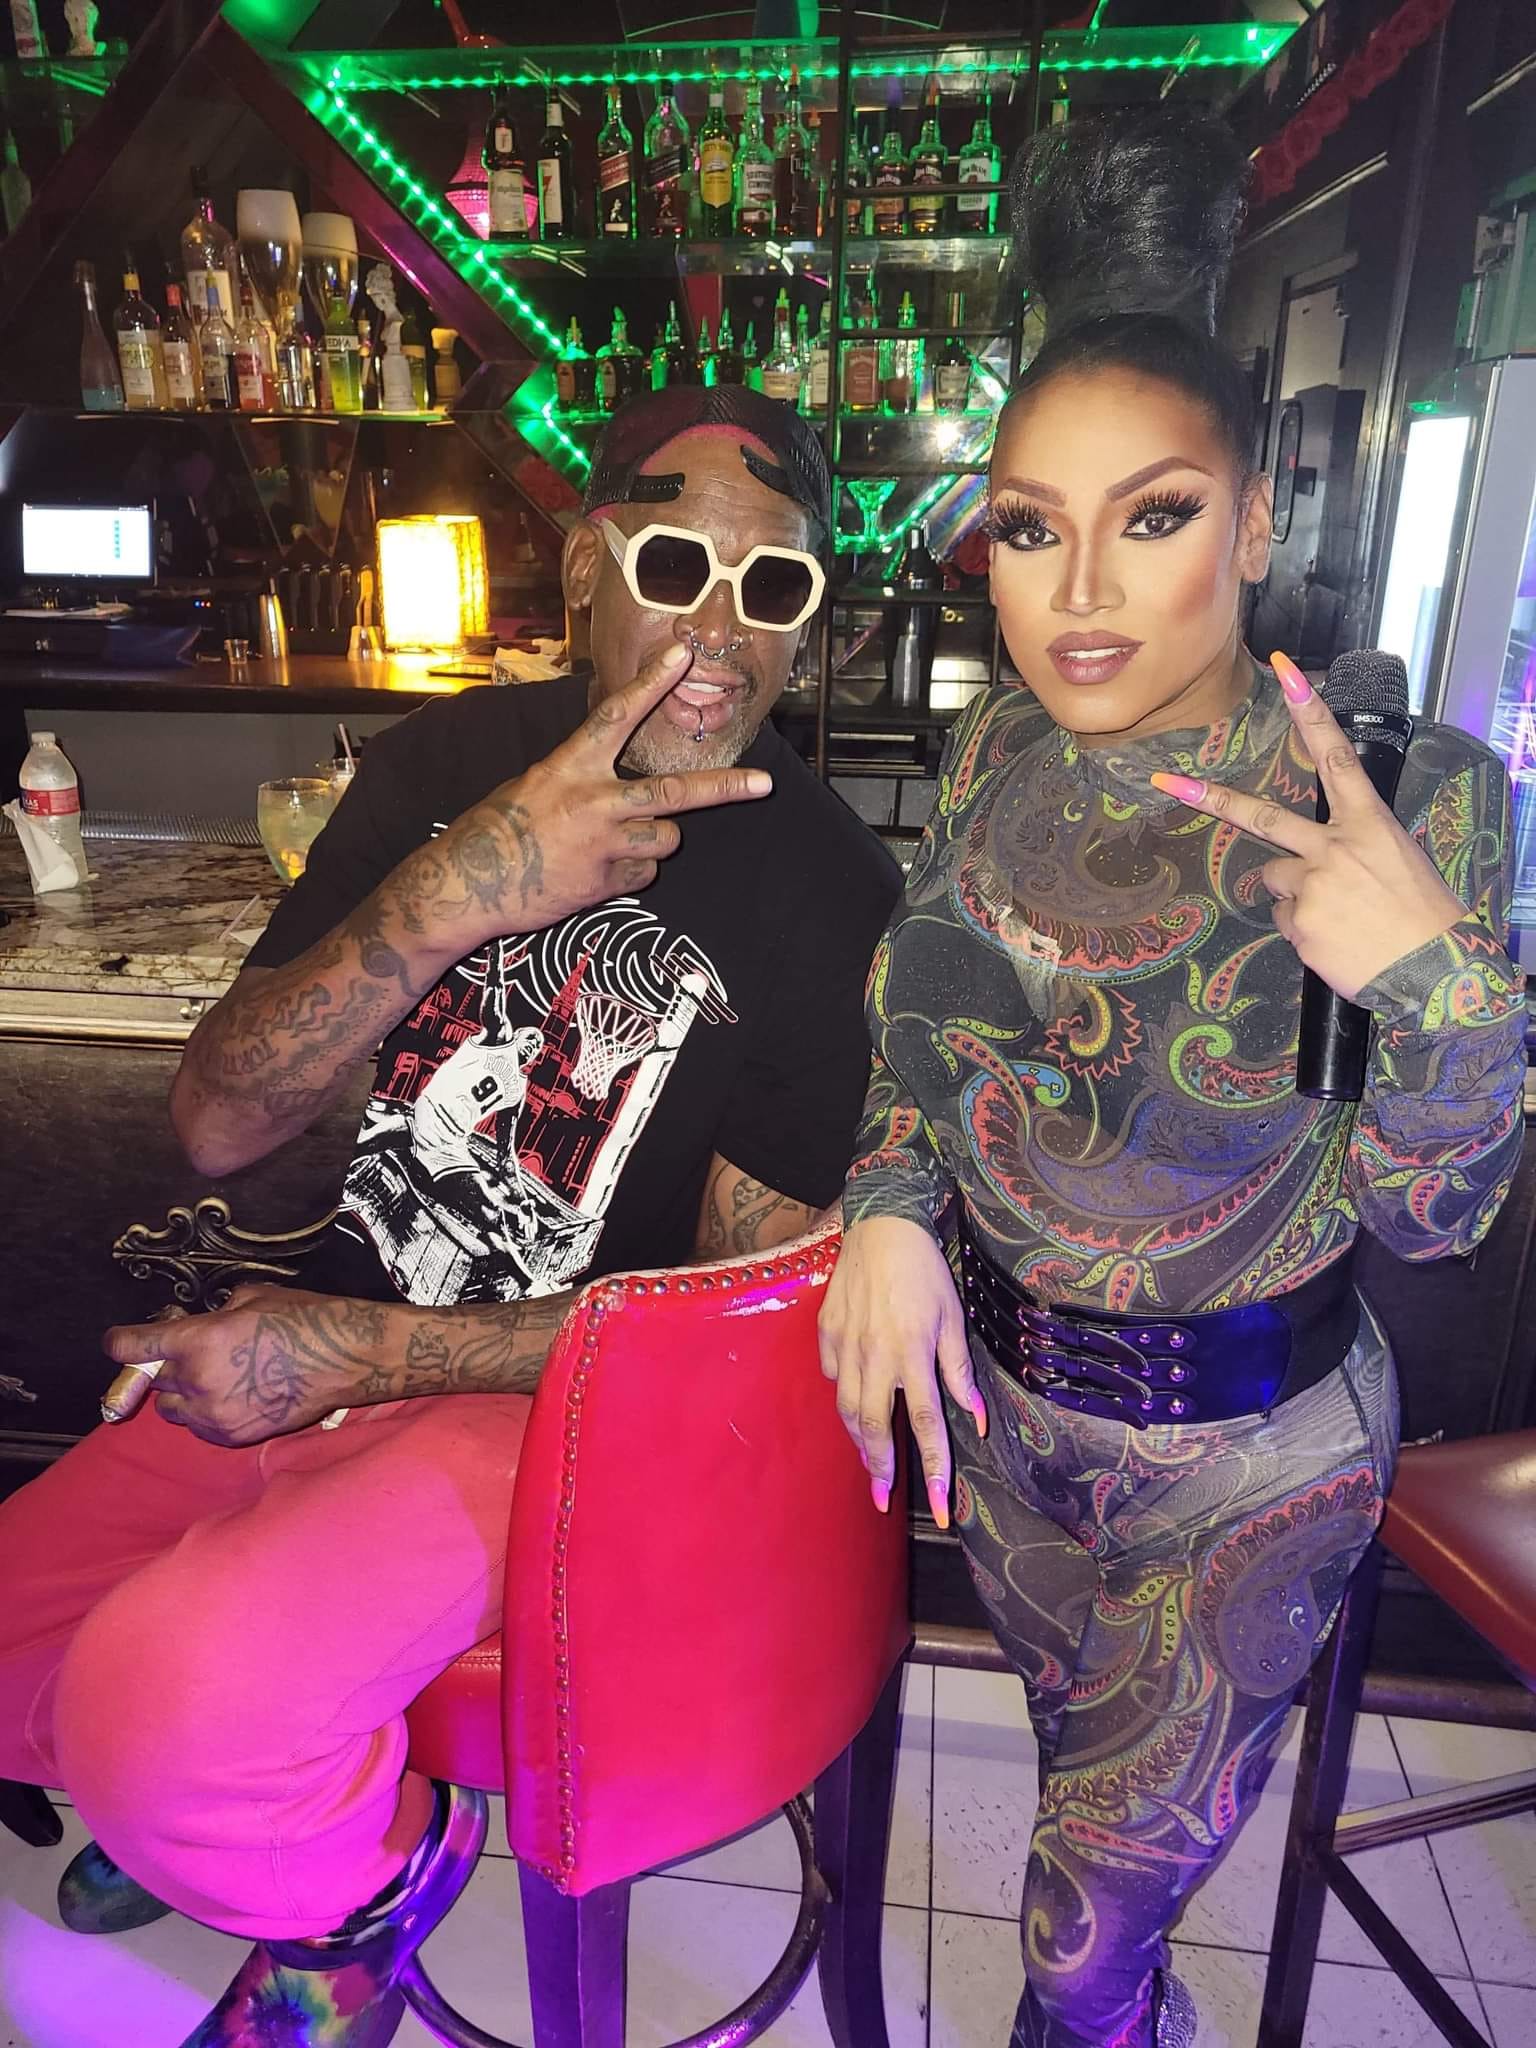 Dennis Rodman spotted at downtown Houston drag show